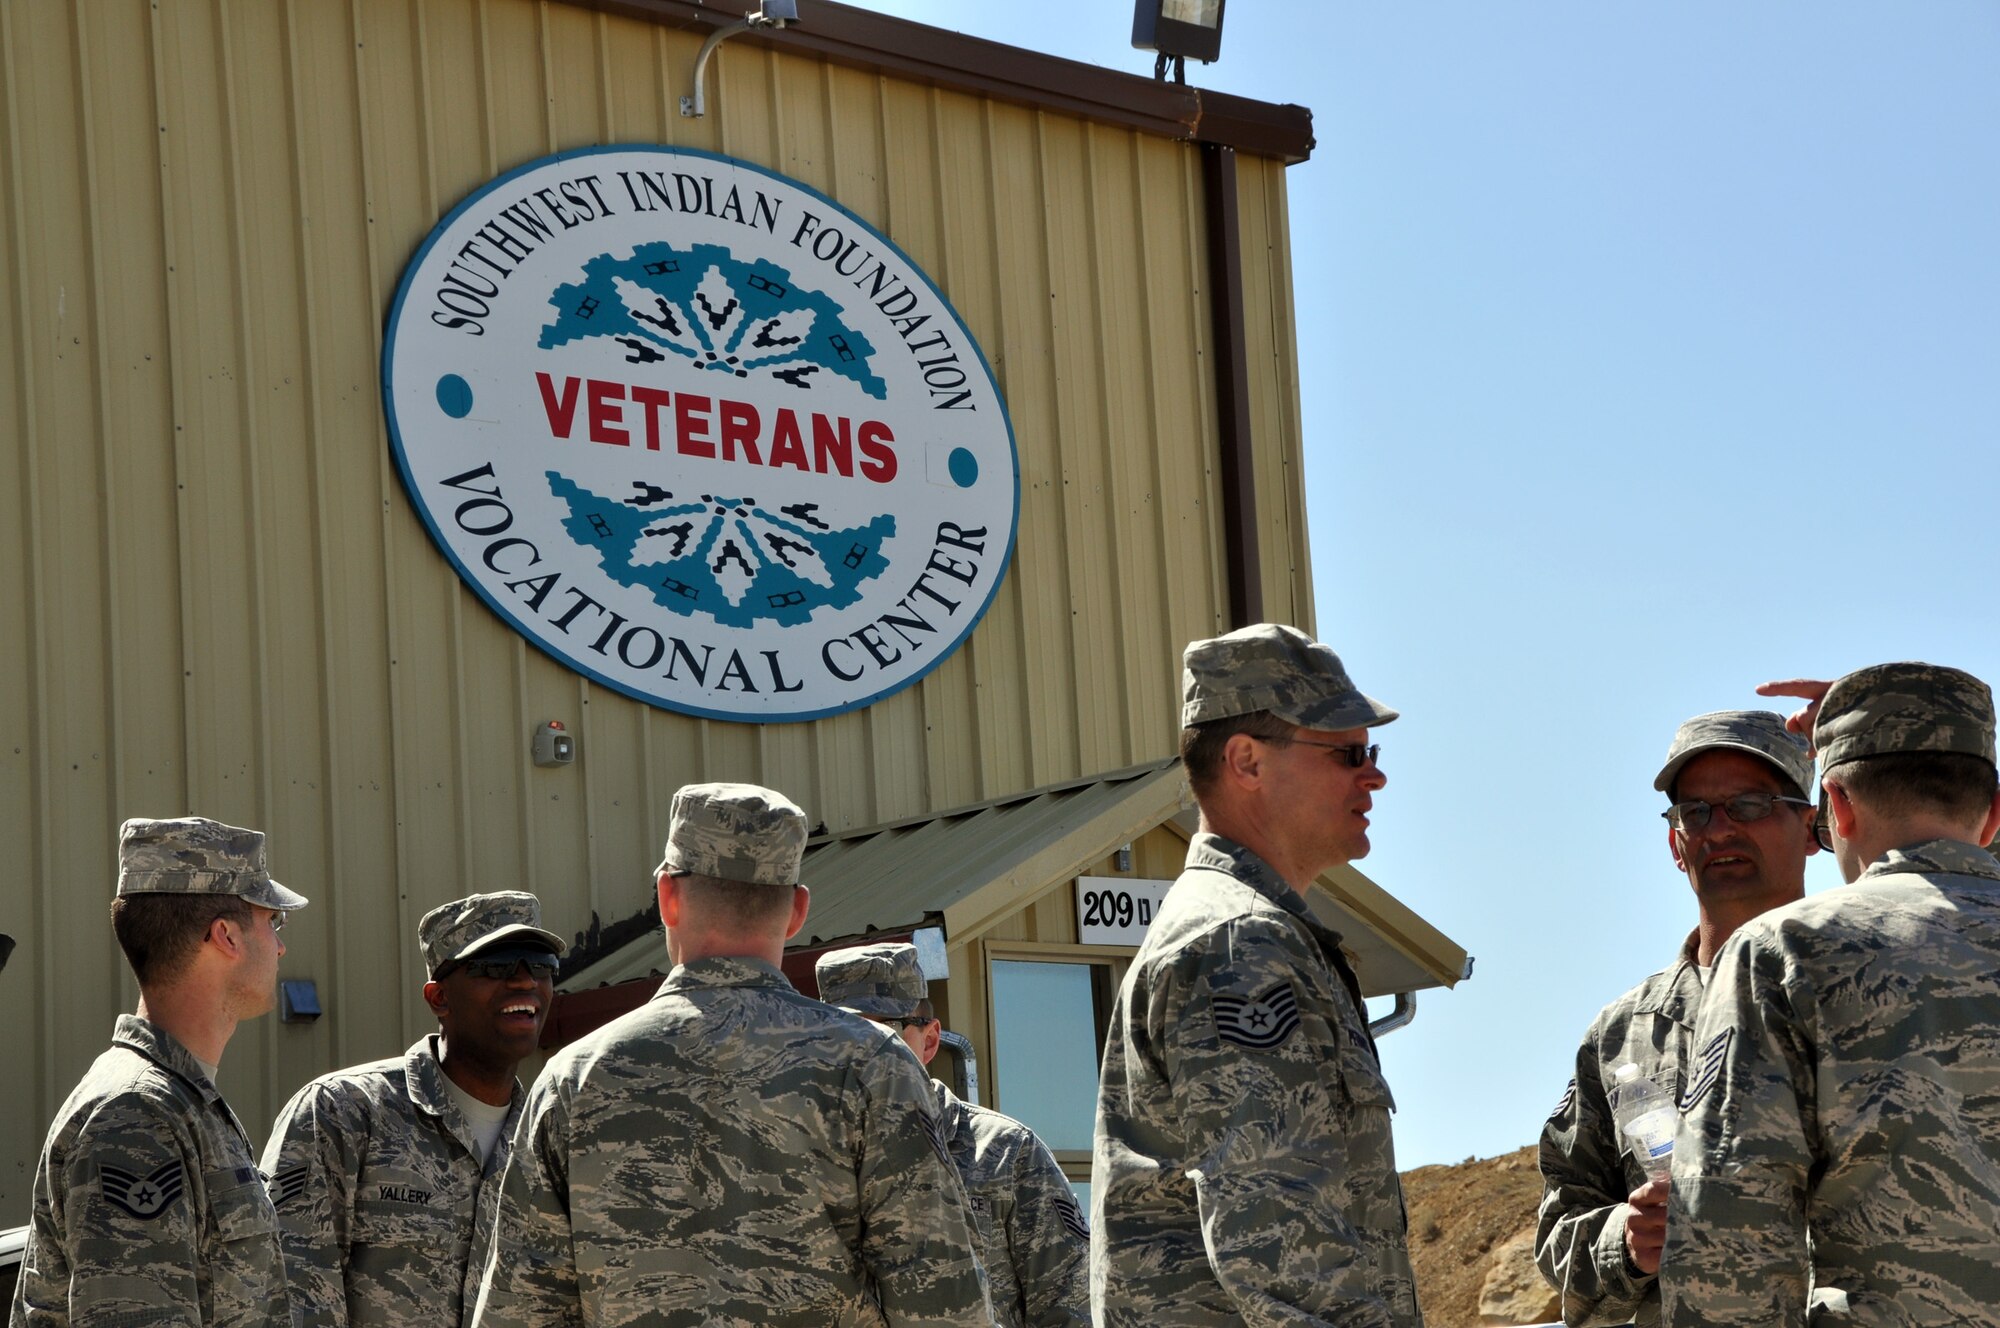 Members of the 911th Civil Engineer Squadron chat while on a break from initial briefings on the first day of Operation Footprint, in Gallup, New Mexico, April 20, 2015. The operation will have around 20 Airmen participating in the construction of homes for the underprivileged of the Navajo Nation. (Photo by Senior Airman Joseph E. Bridge)